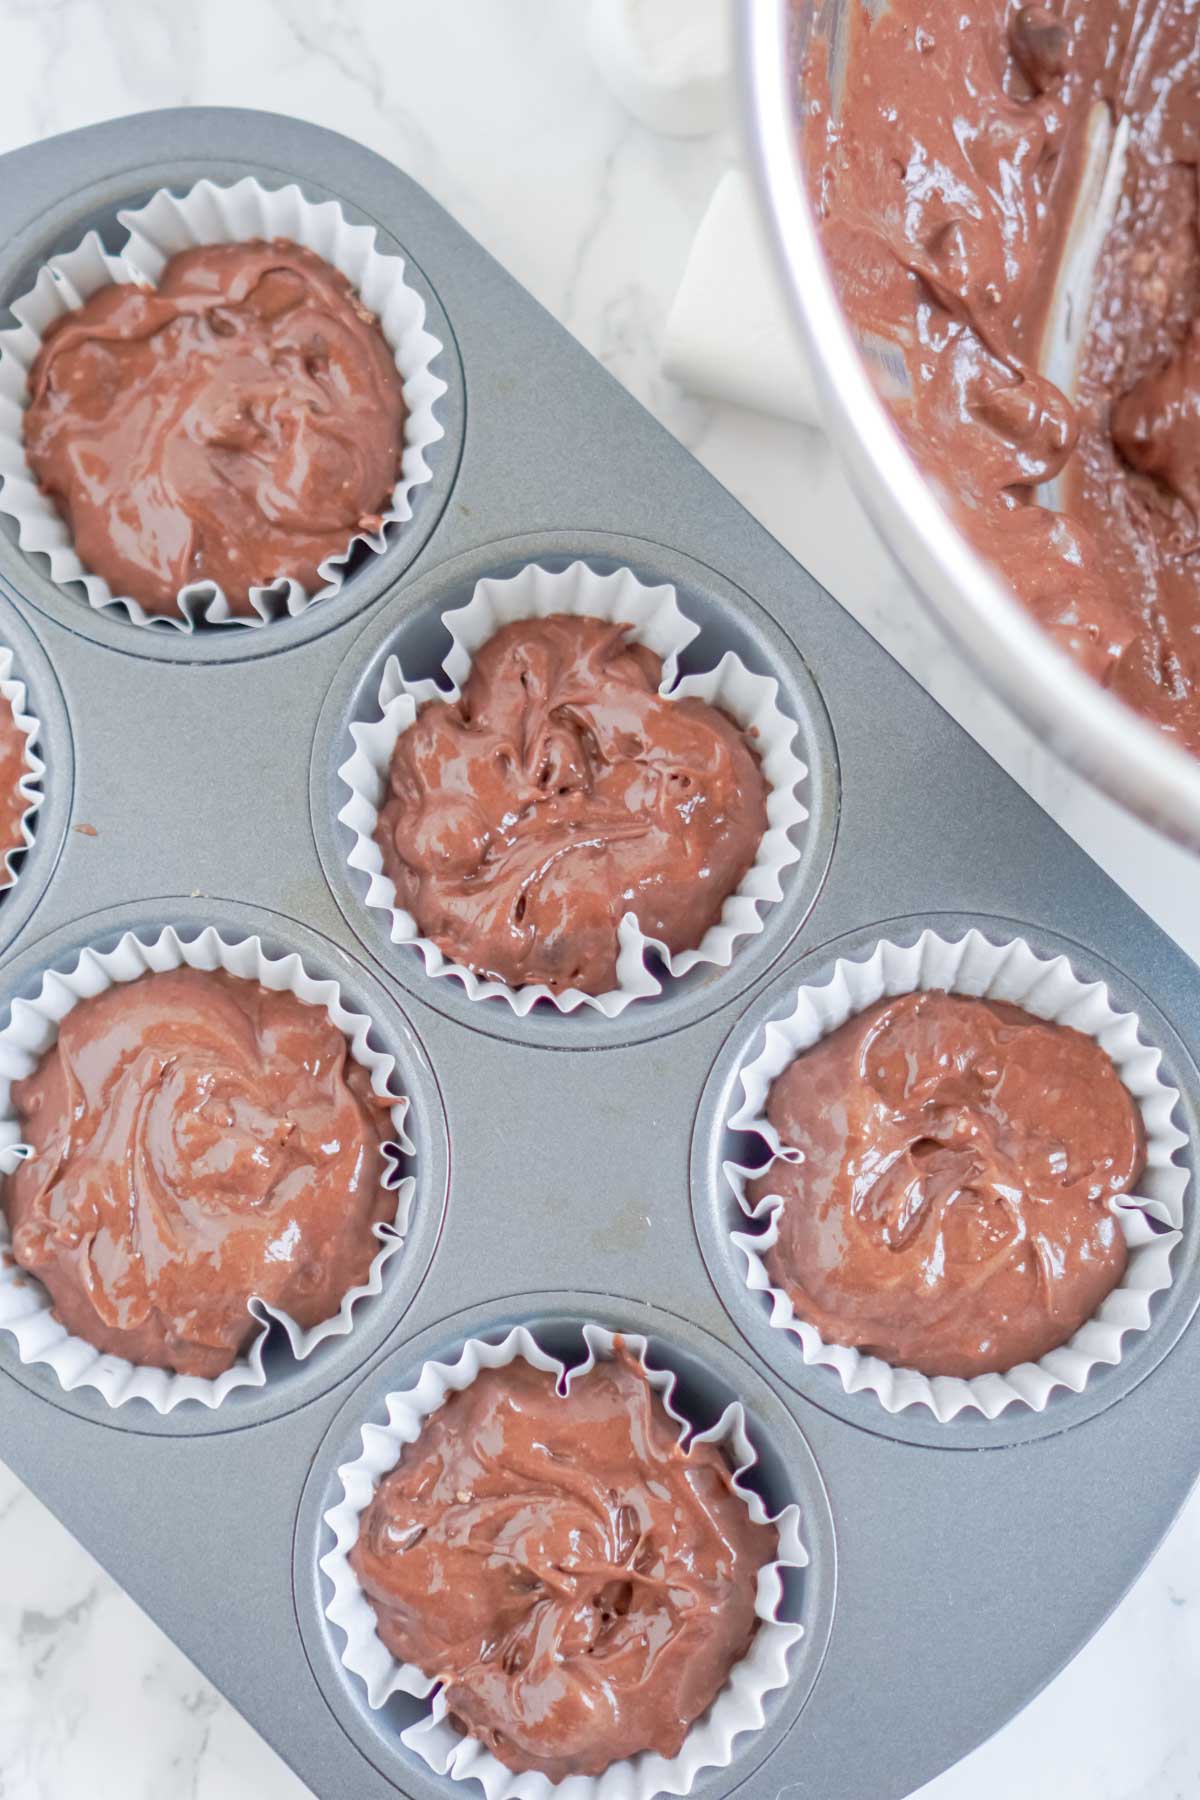 Batter for hot chocolate cupcakes in cupcake tins